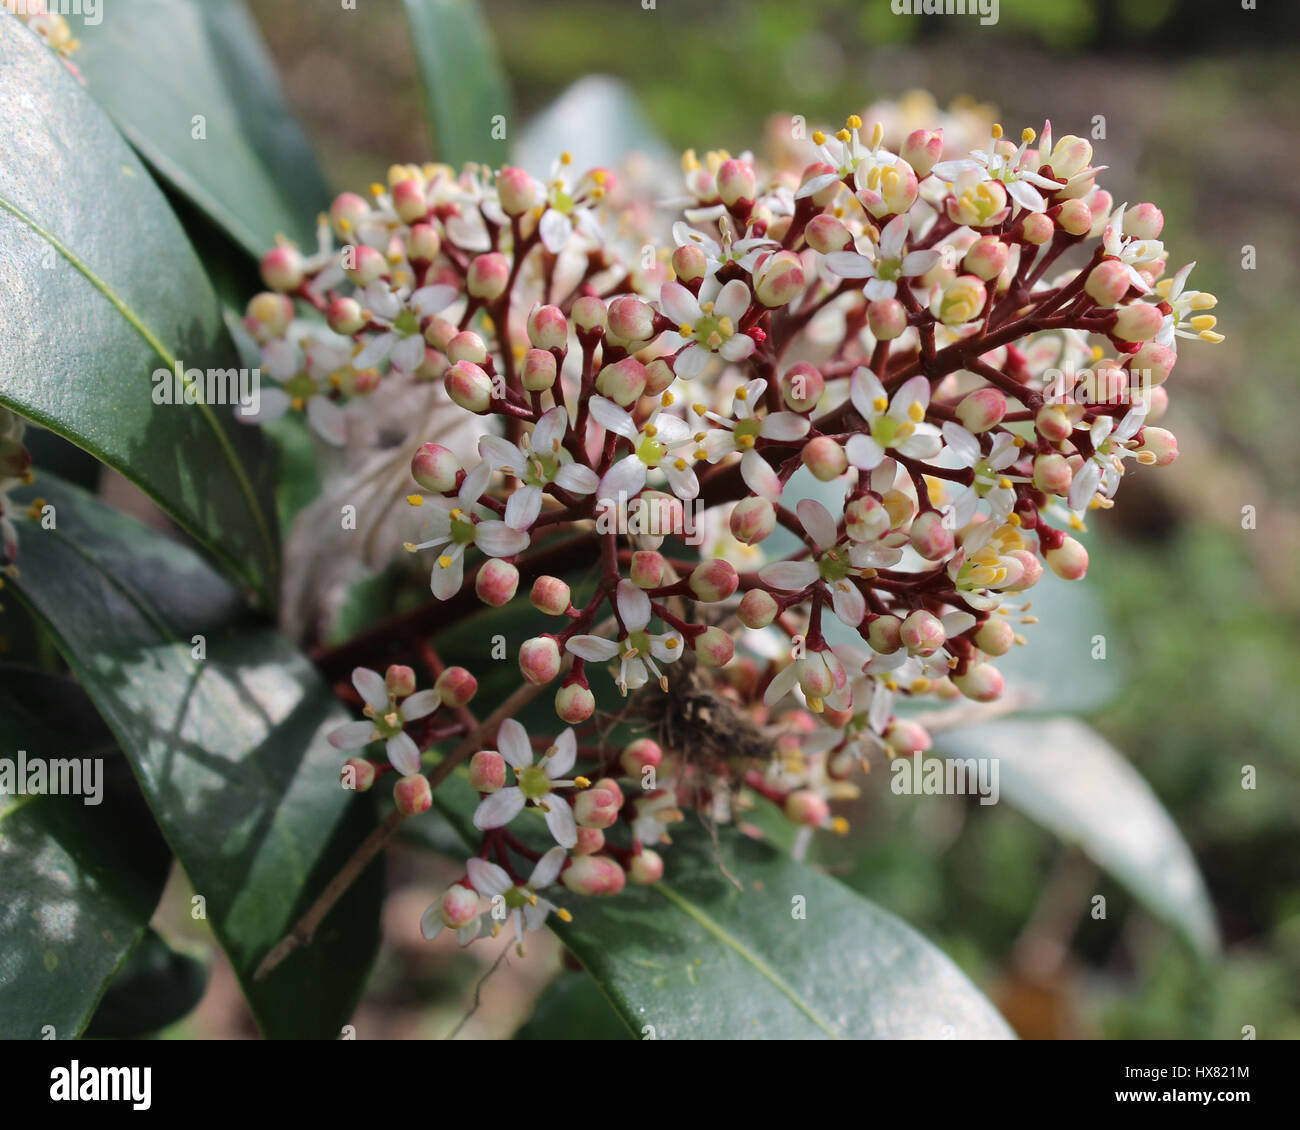 The pretty white flowers of of Skimmia japonica also known as Japanese skimmia, a spring flowering evergreen shrub. Stock Photo